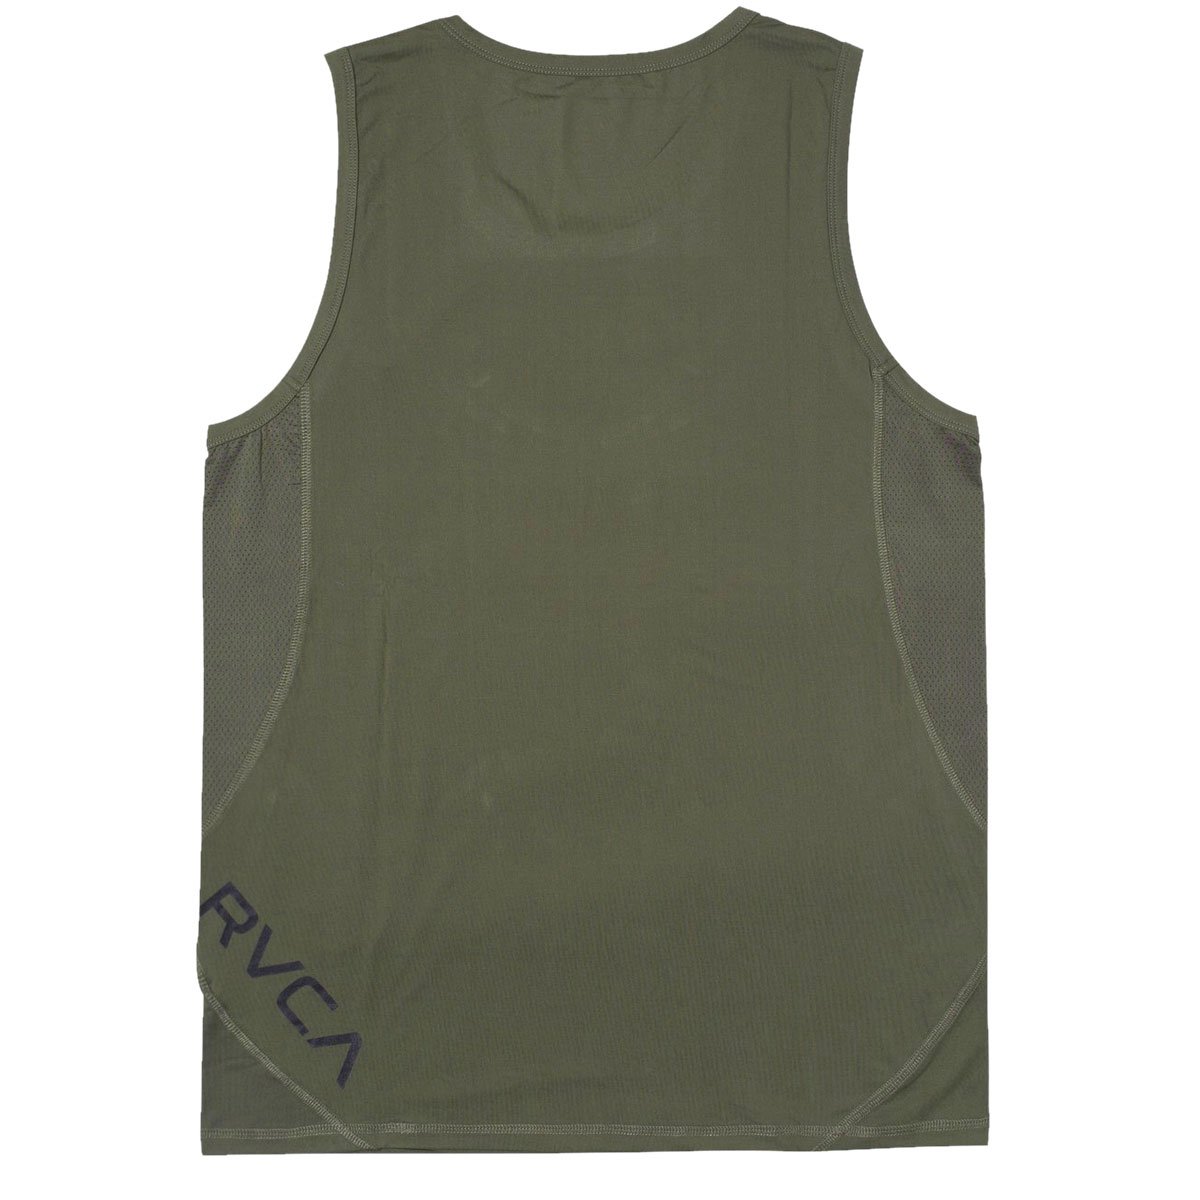 RVCA Sport Vent Sleeve T-Shirt - Olive image 2